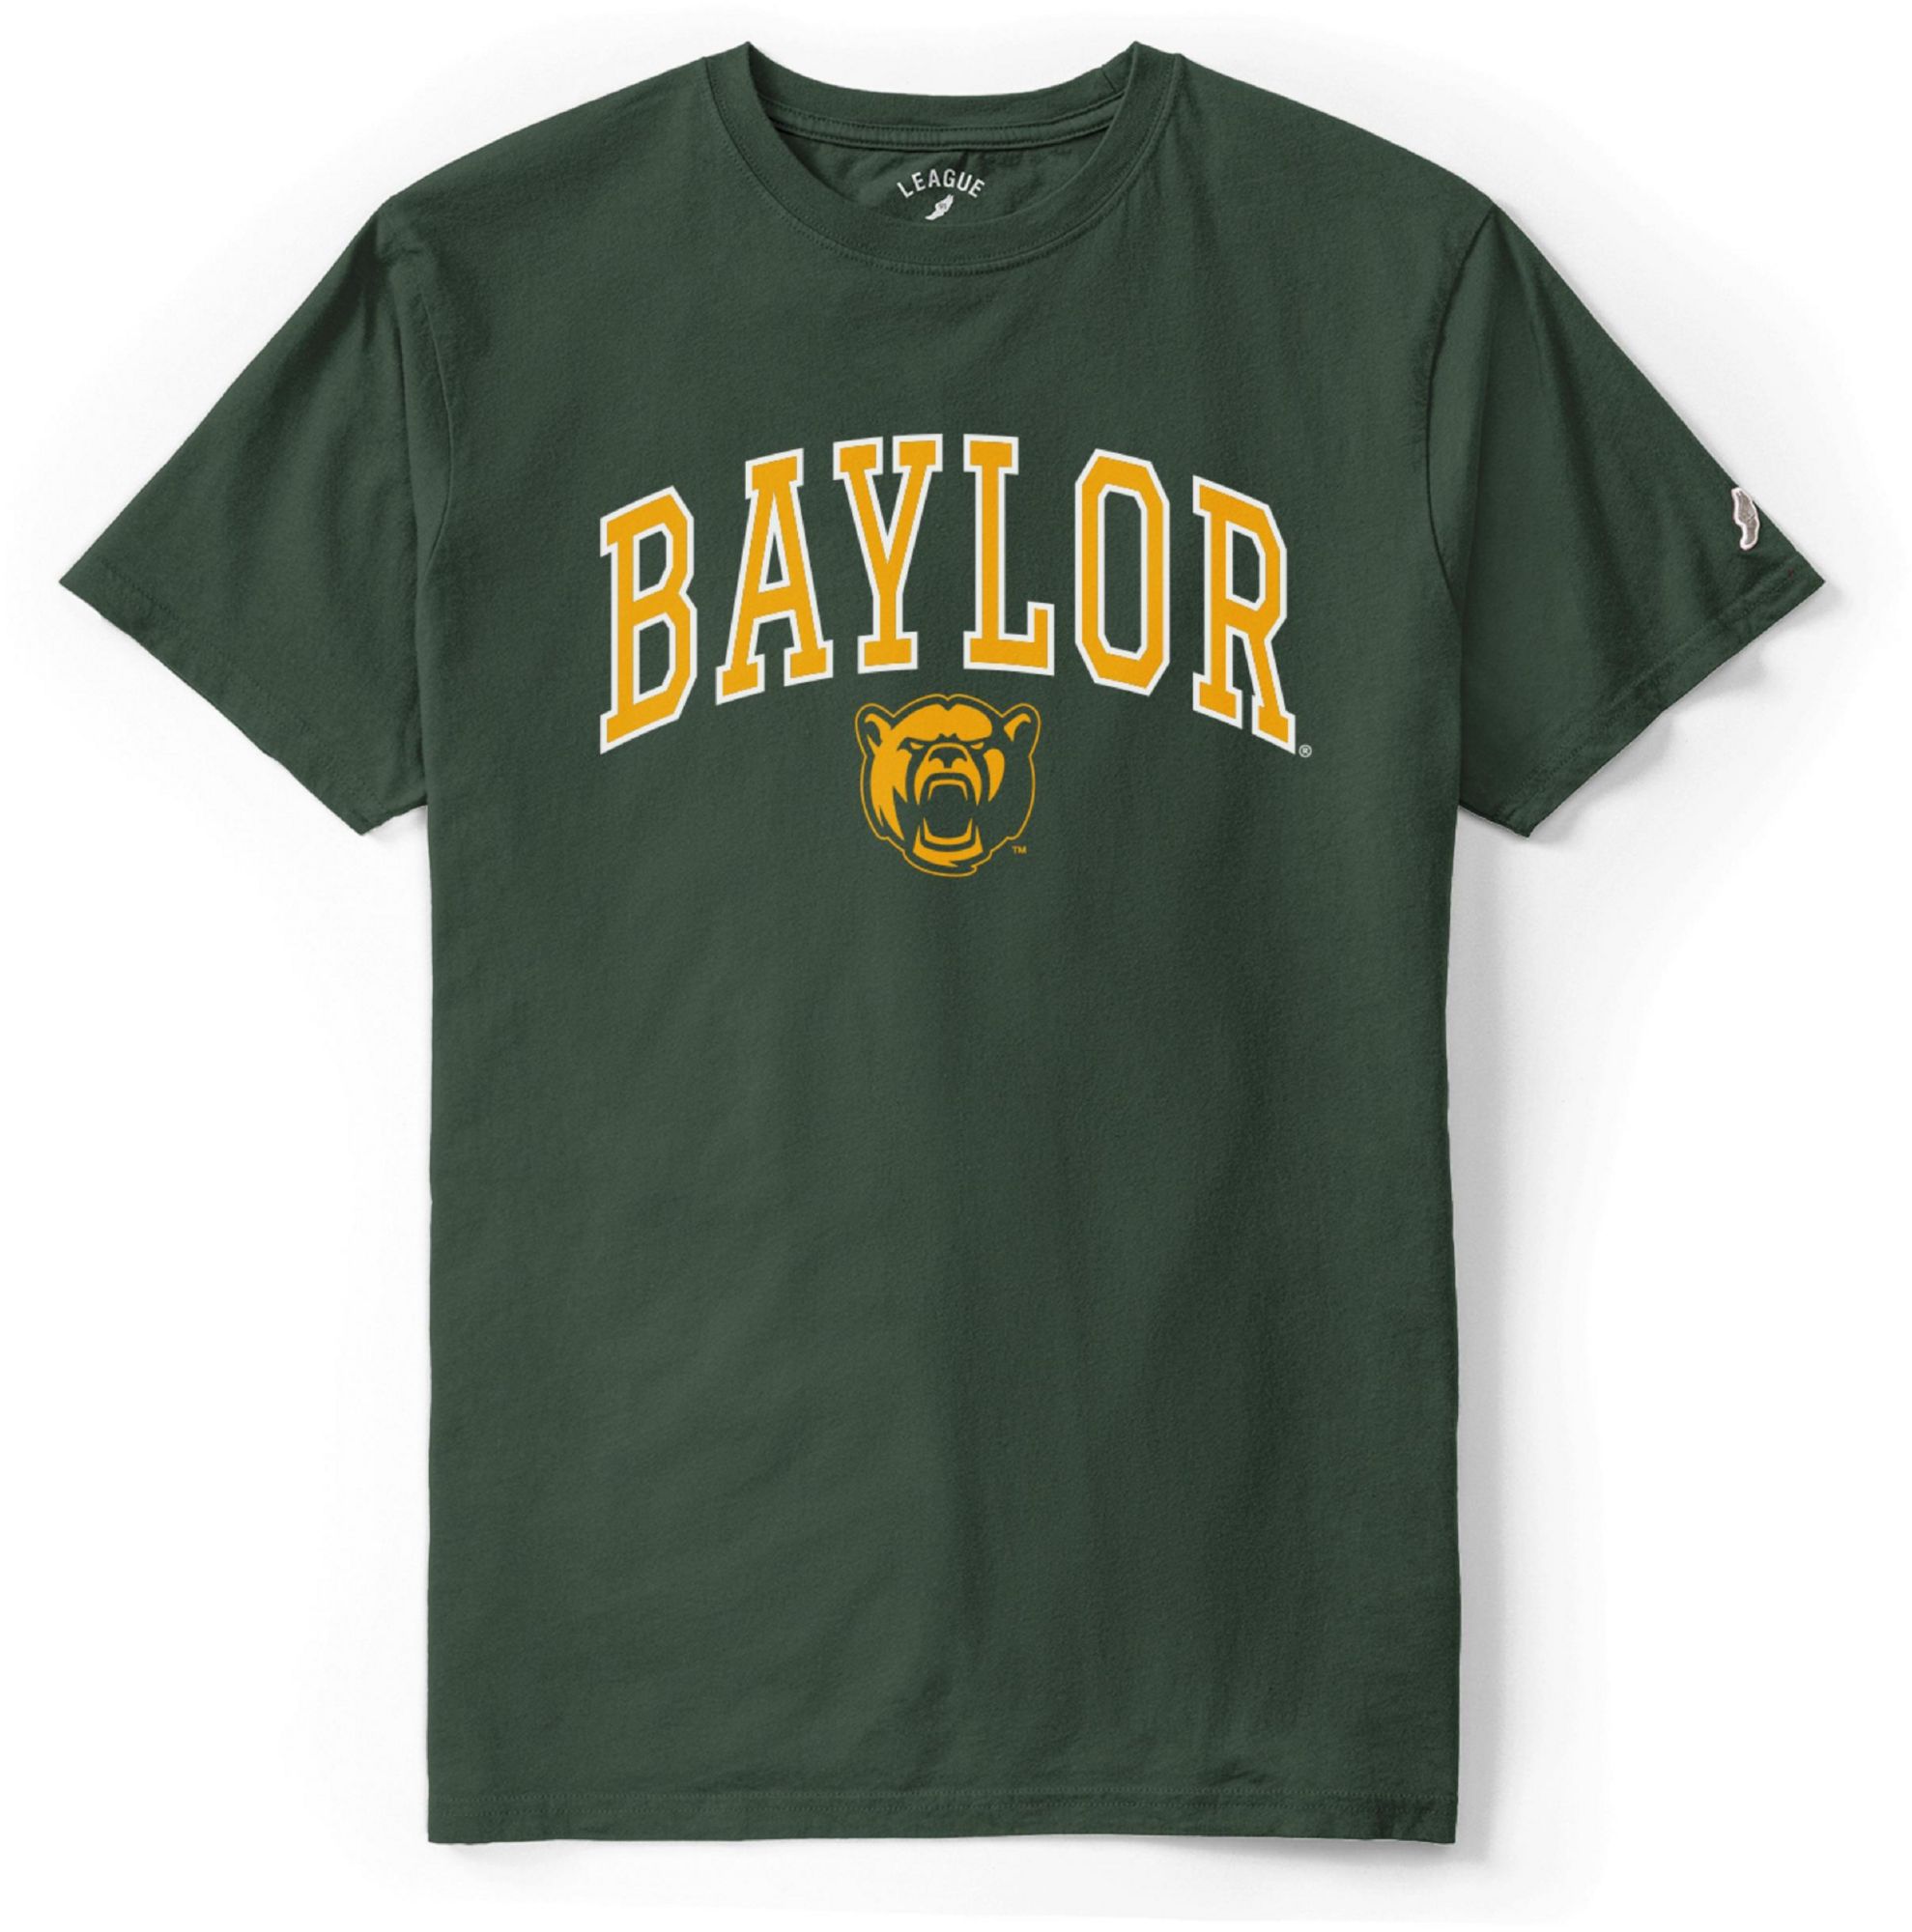 Baylor Bears track and field legends jersey